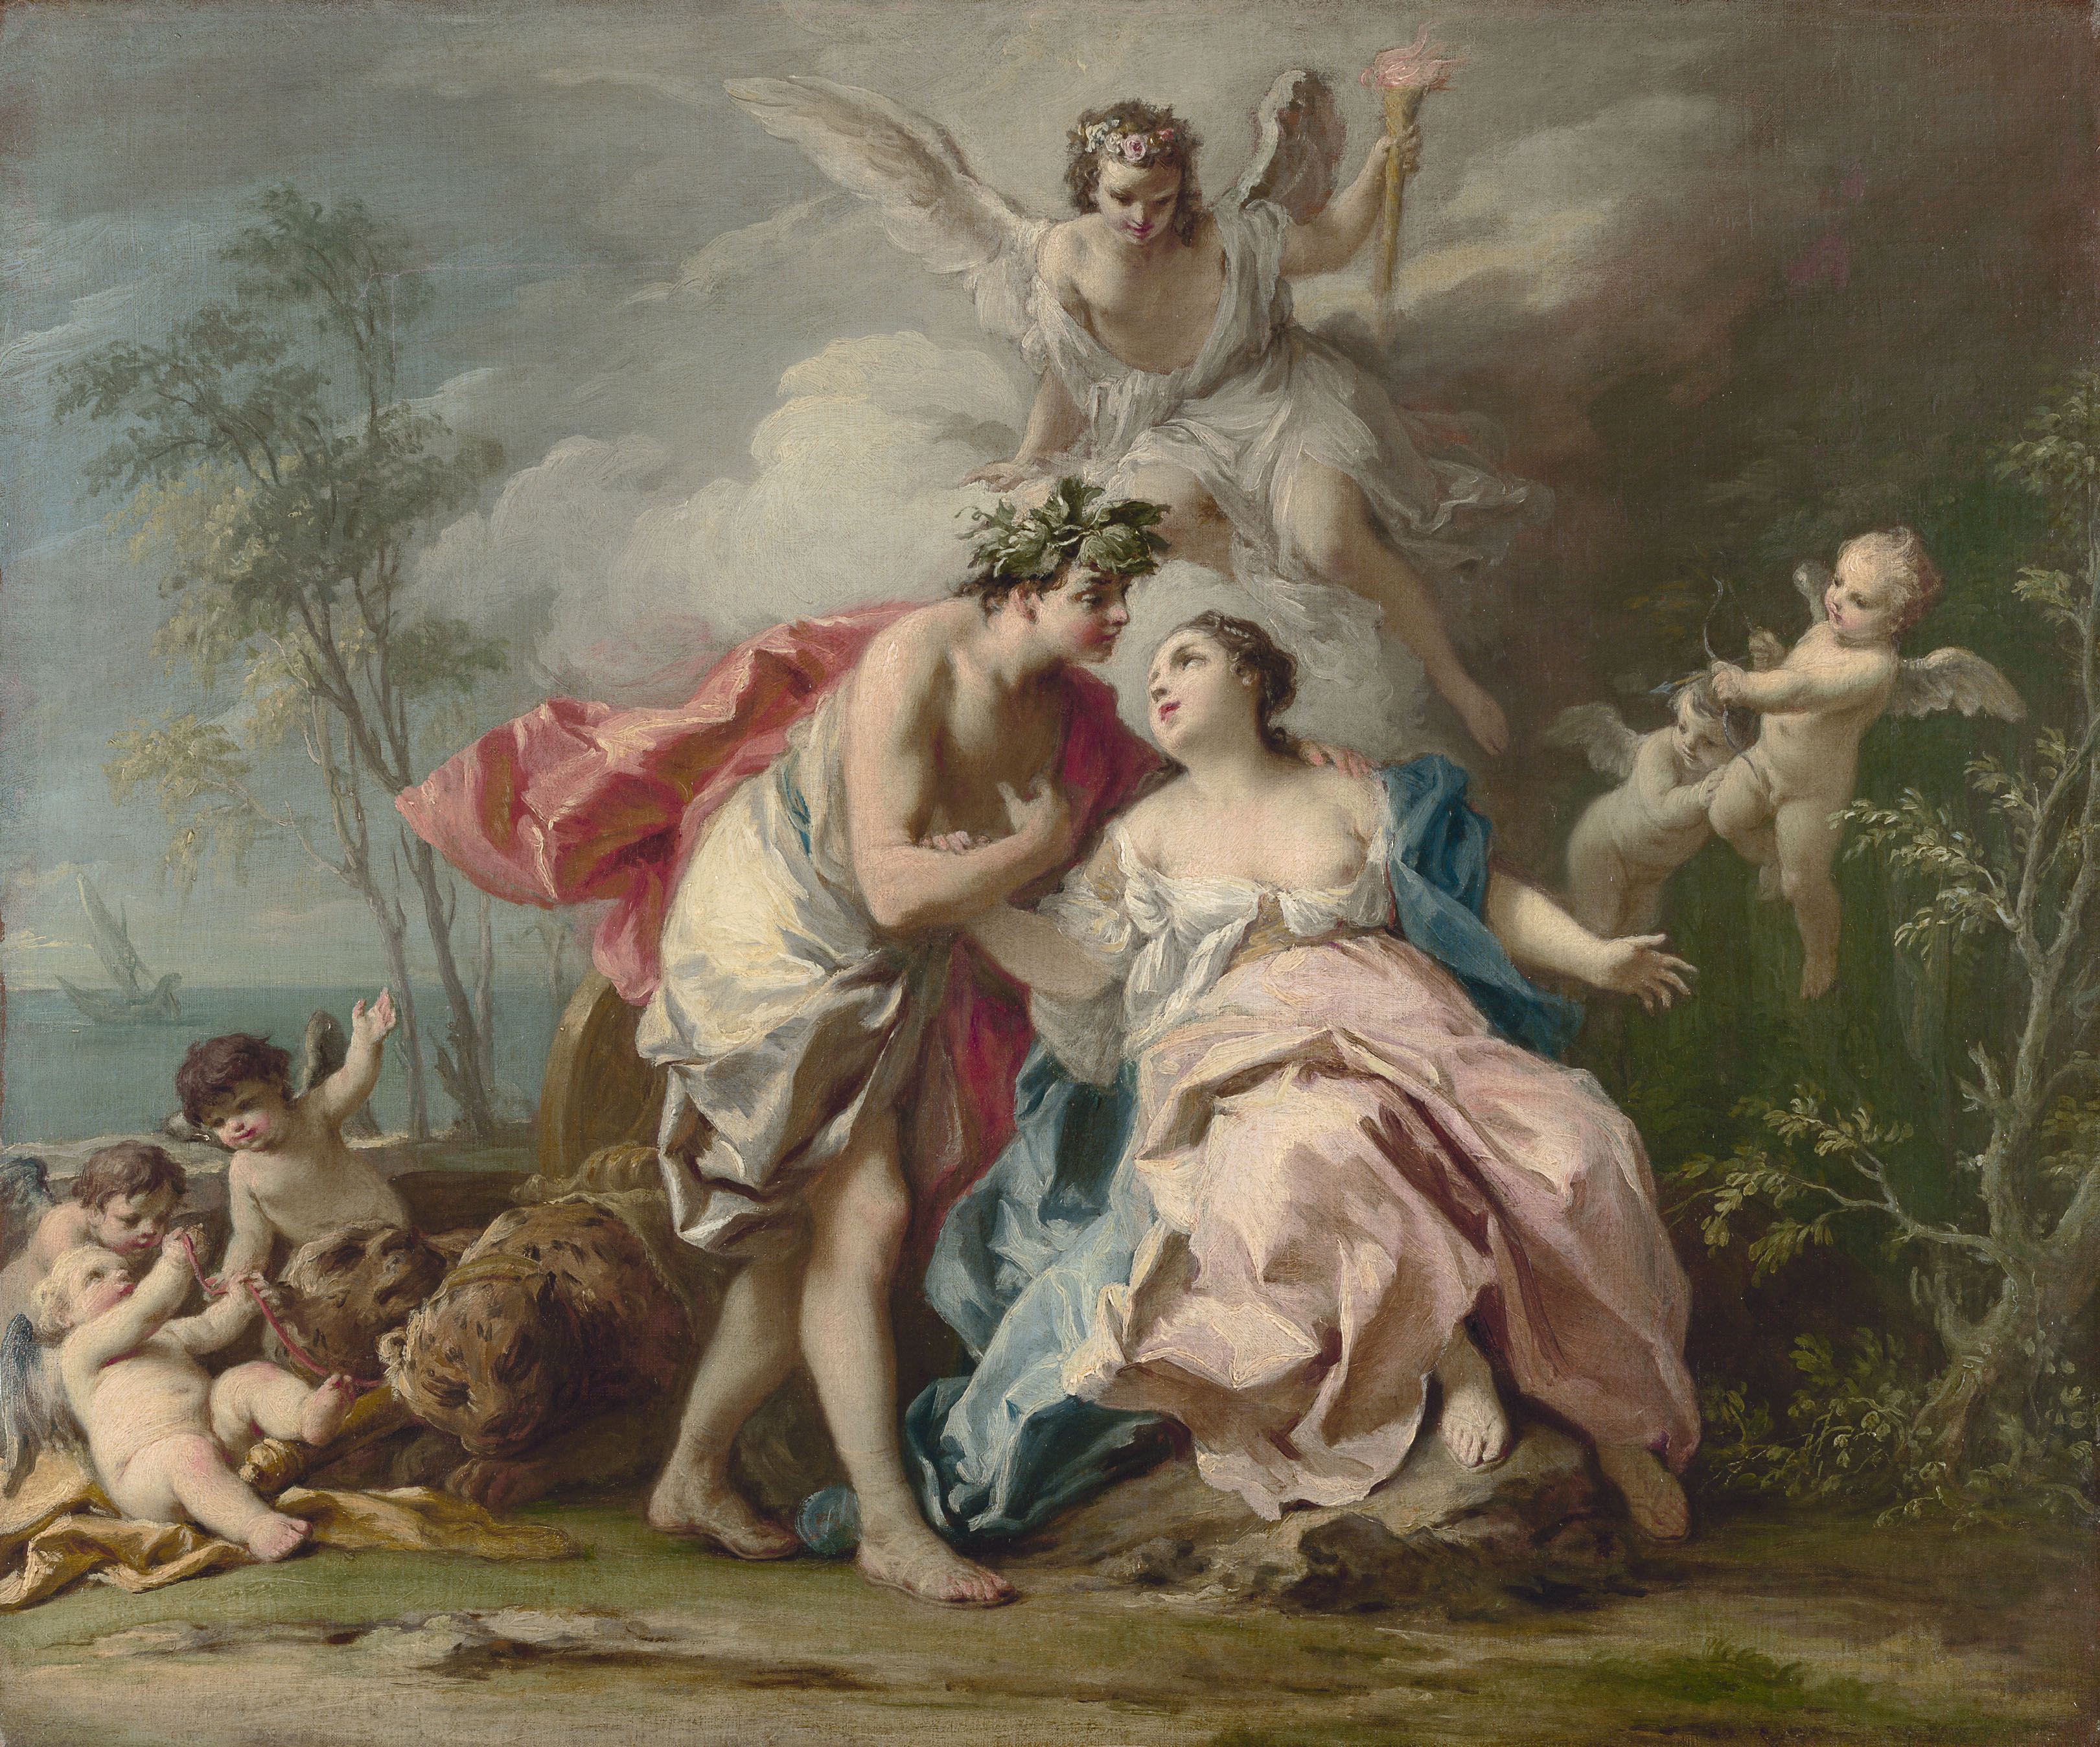 A painting of a man and woman in flowing garments in an embrace, they are surrounded by an angel and cherubs.